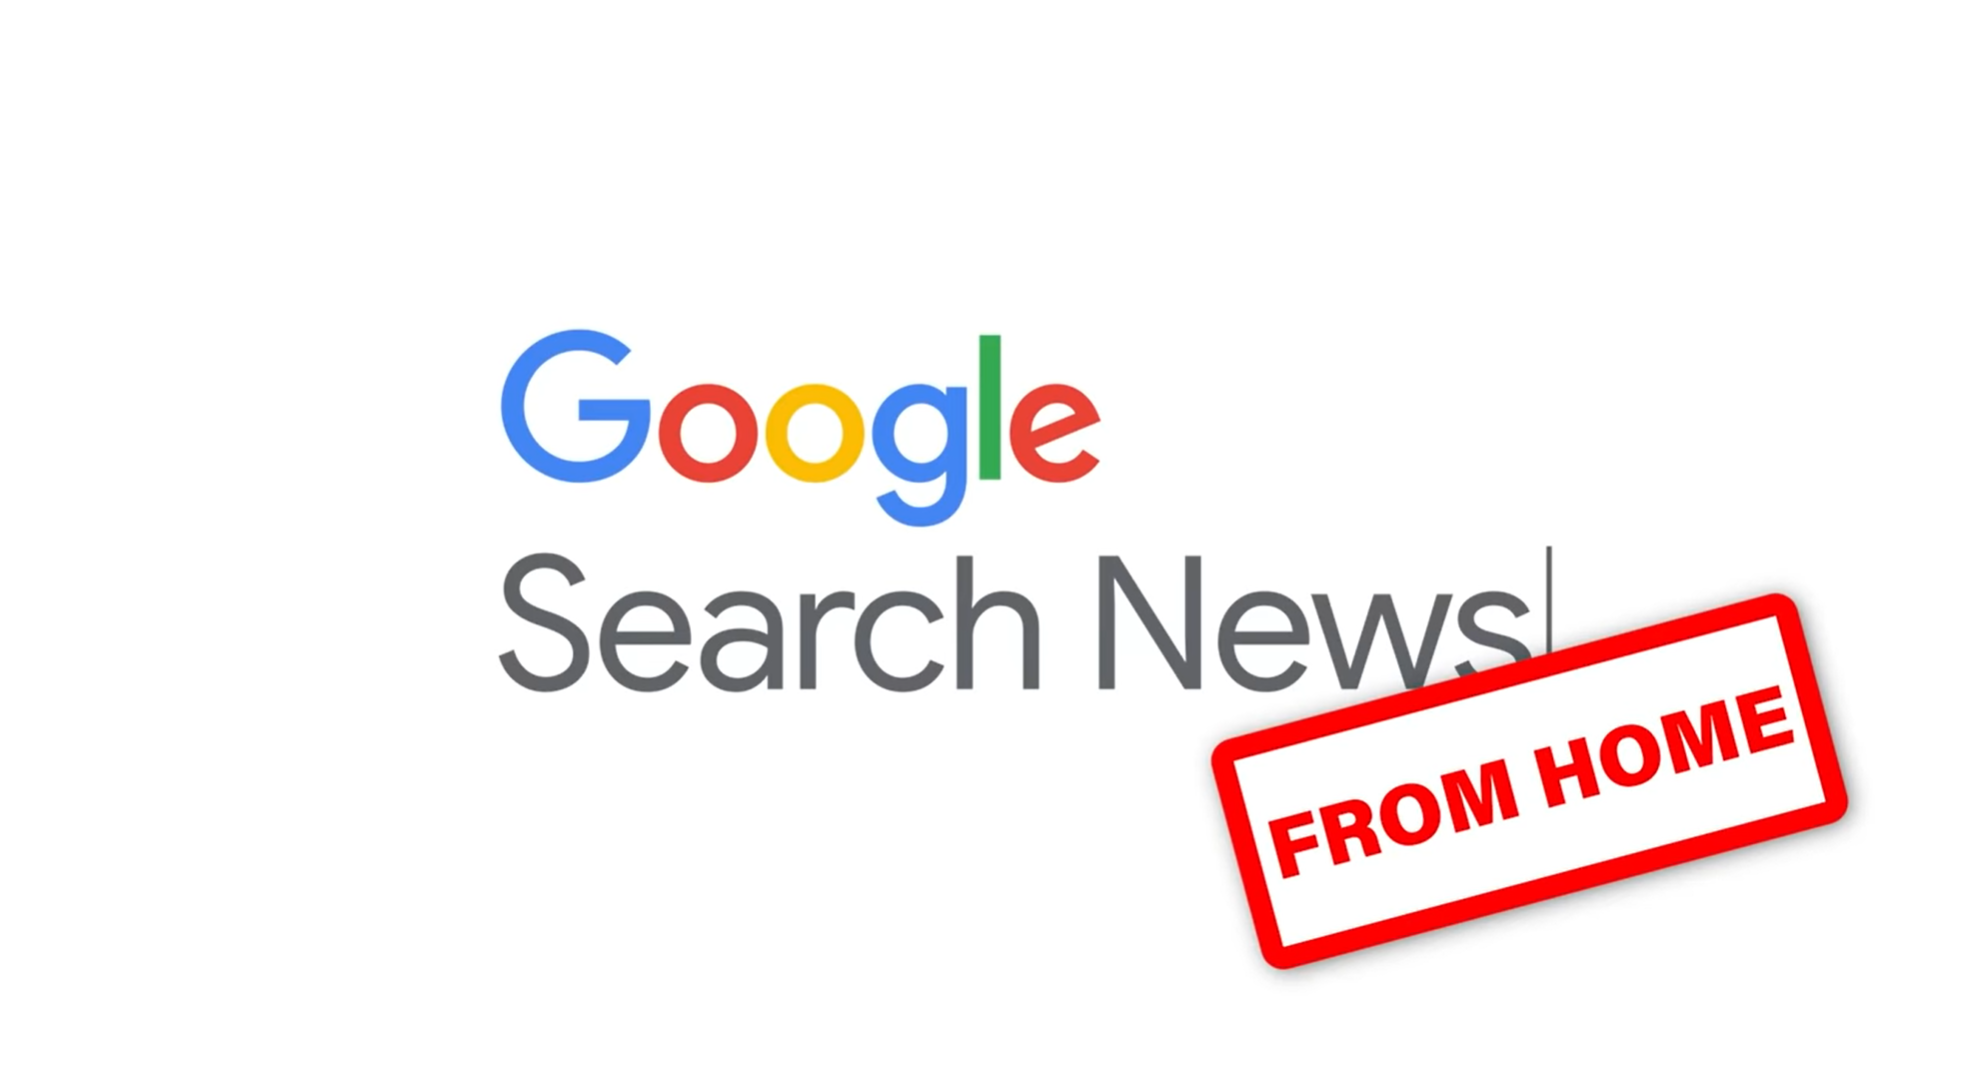 Google Search News from Home